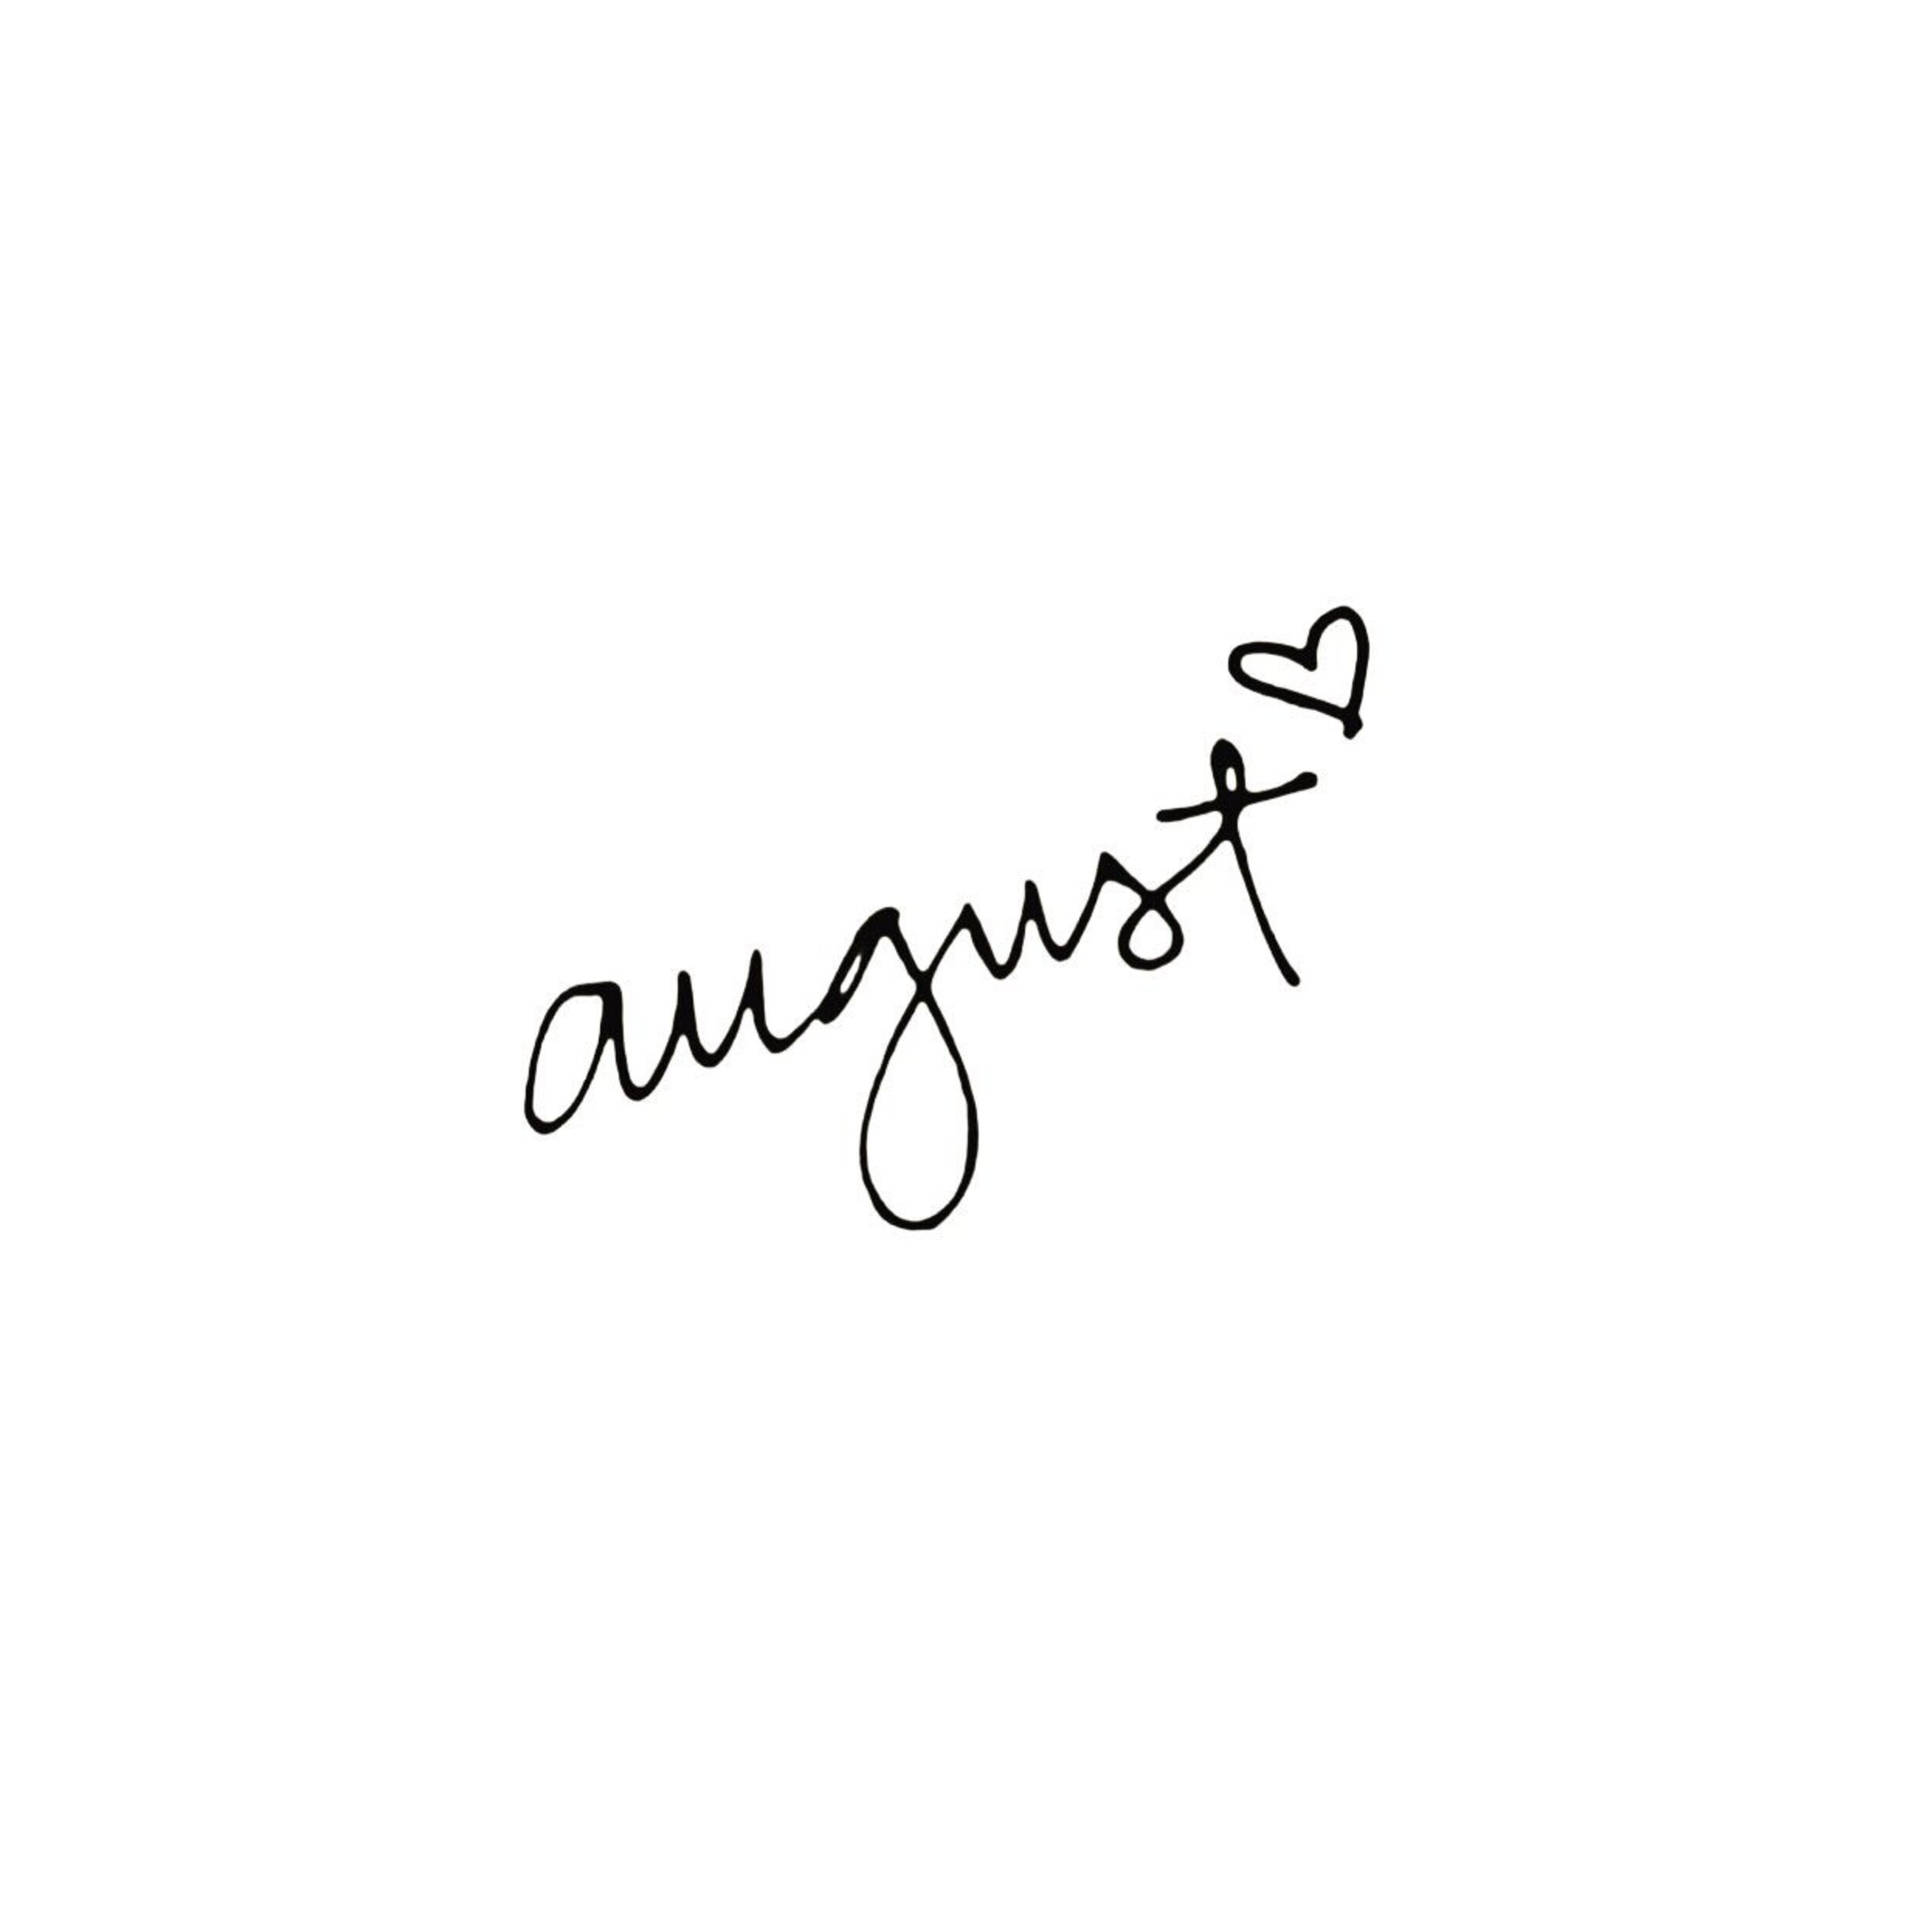 August is the time to prioritize what's most important in life Wallpaper